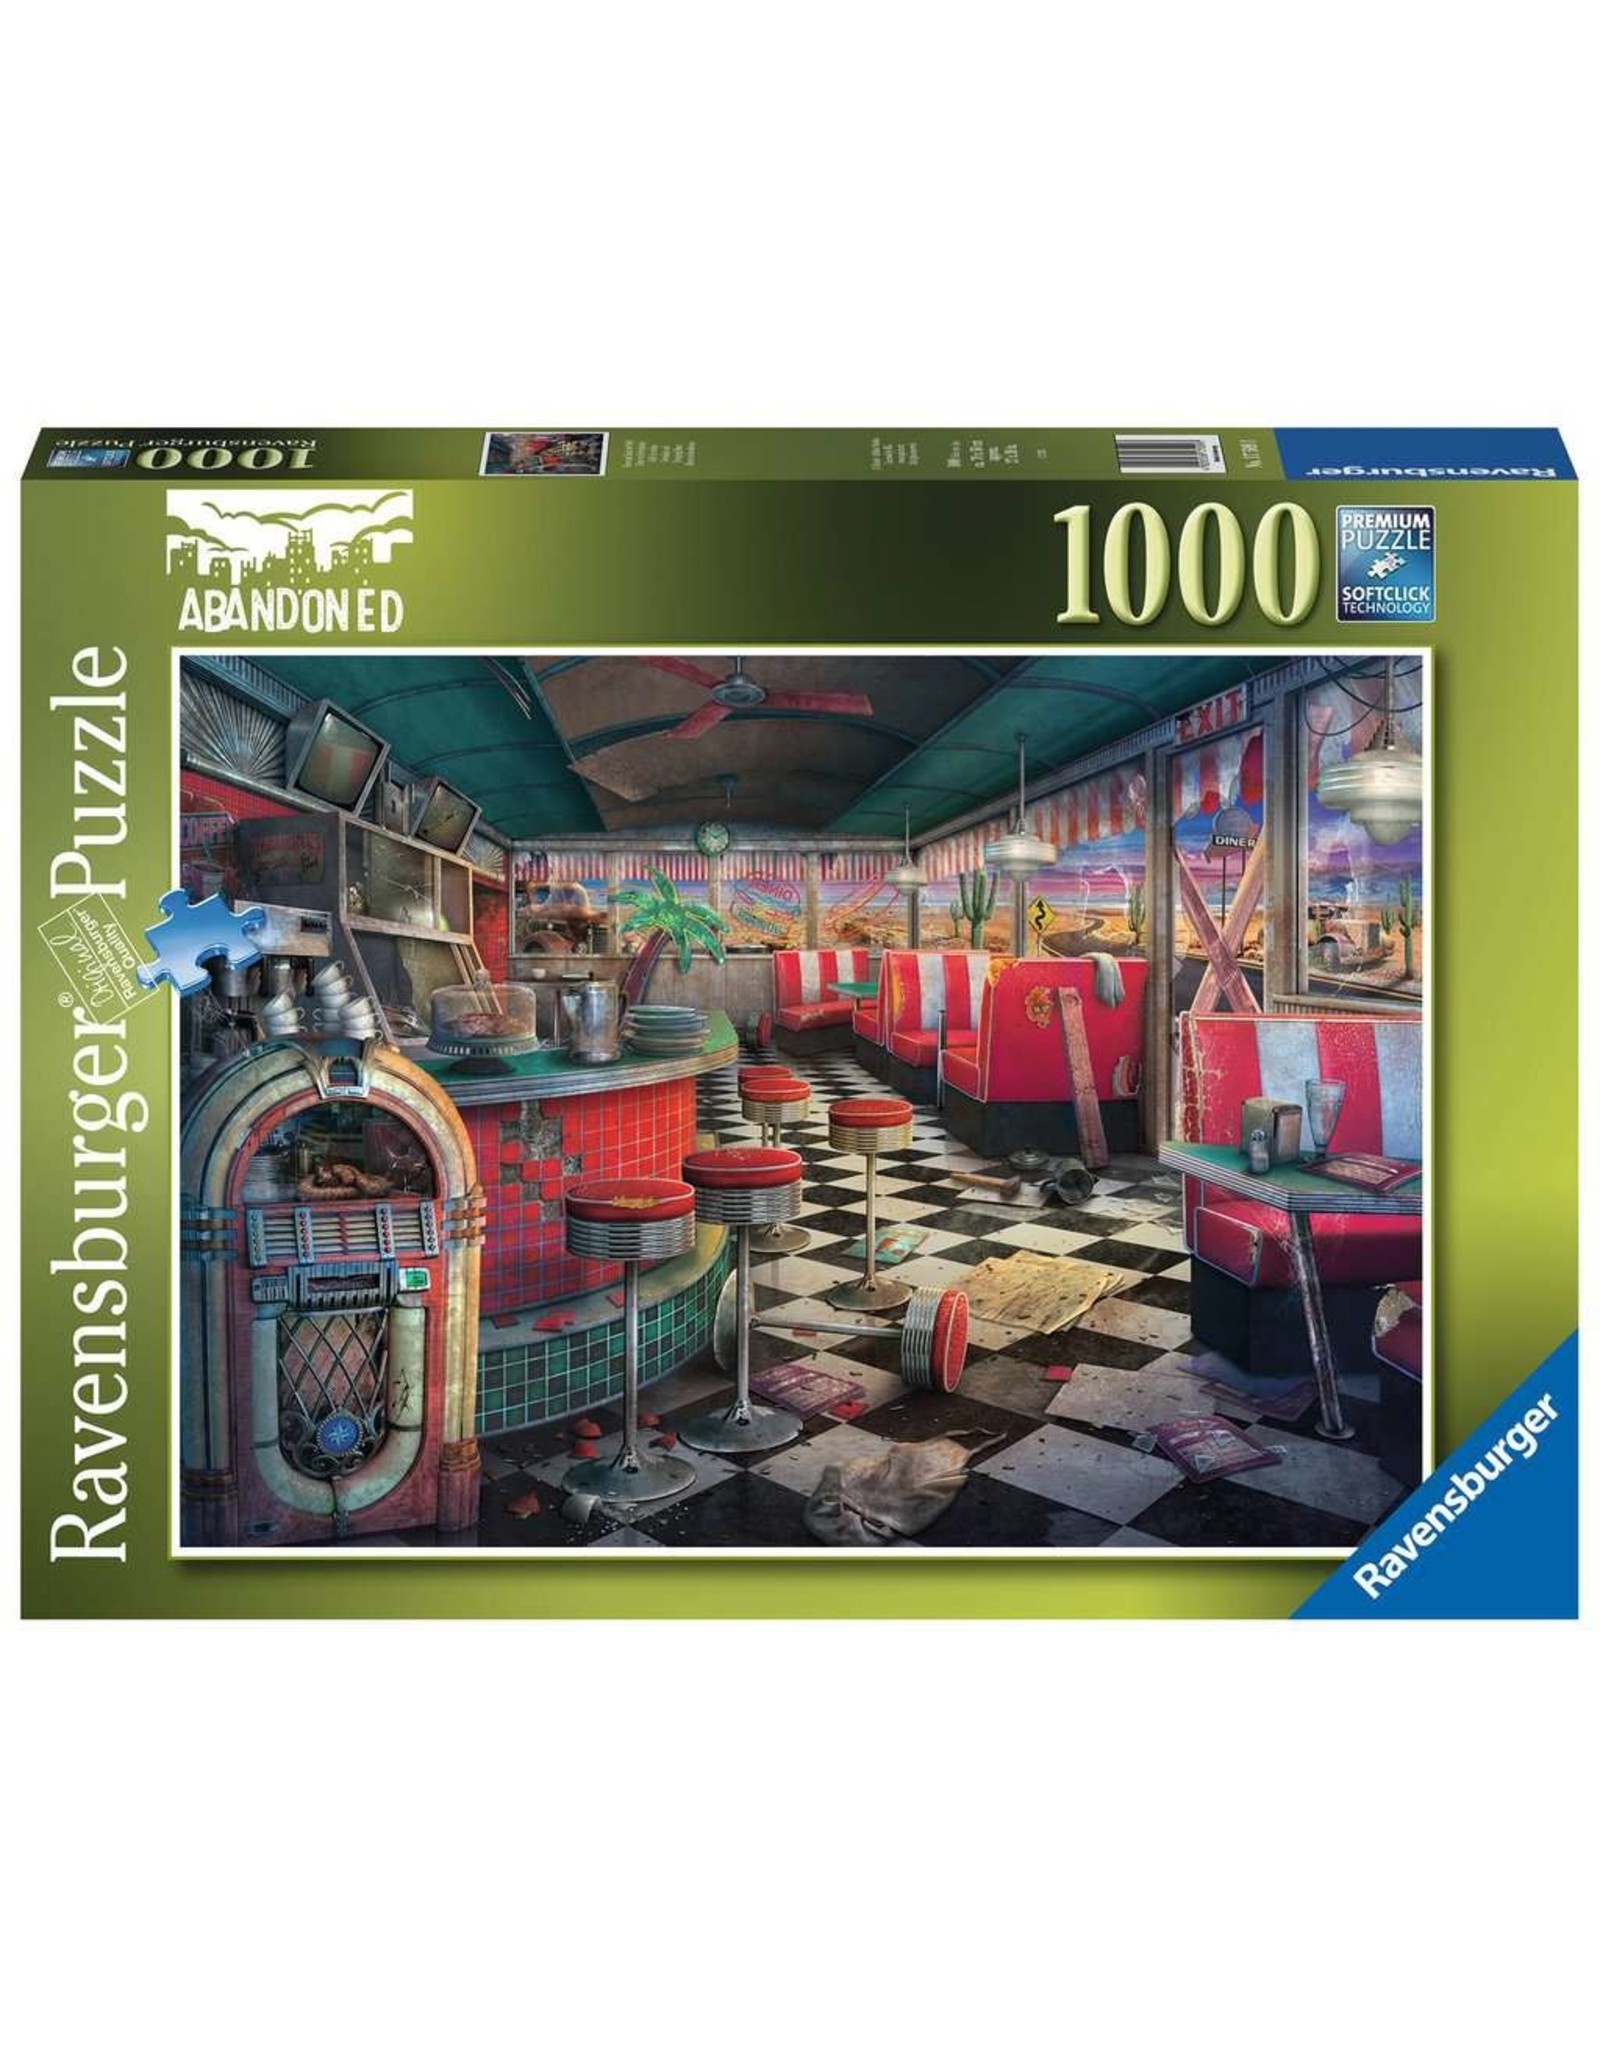 Ravensburger Abandoned Places: Decaying Diner 1000pc